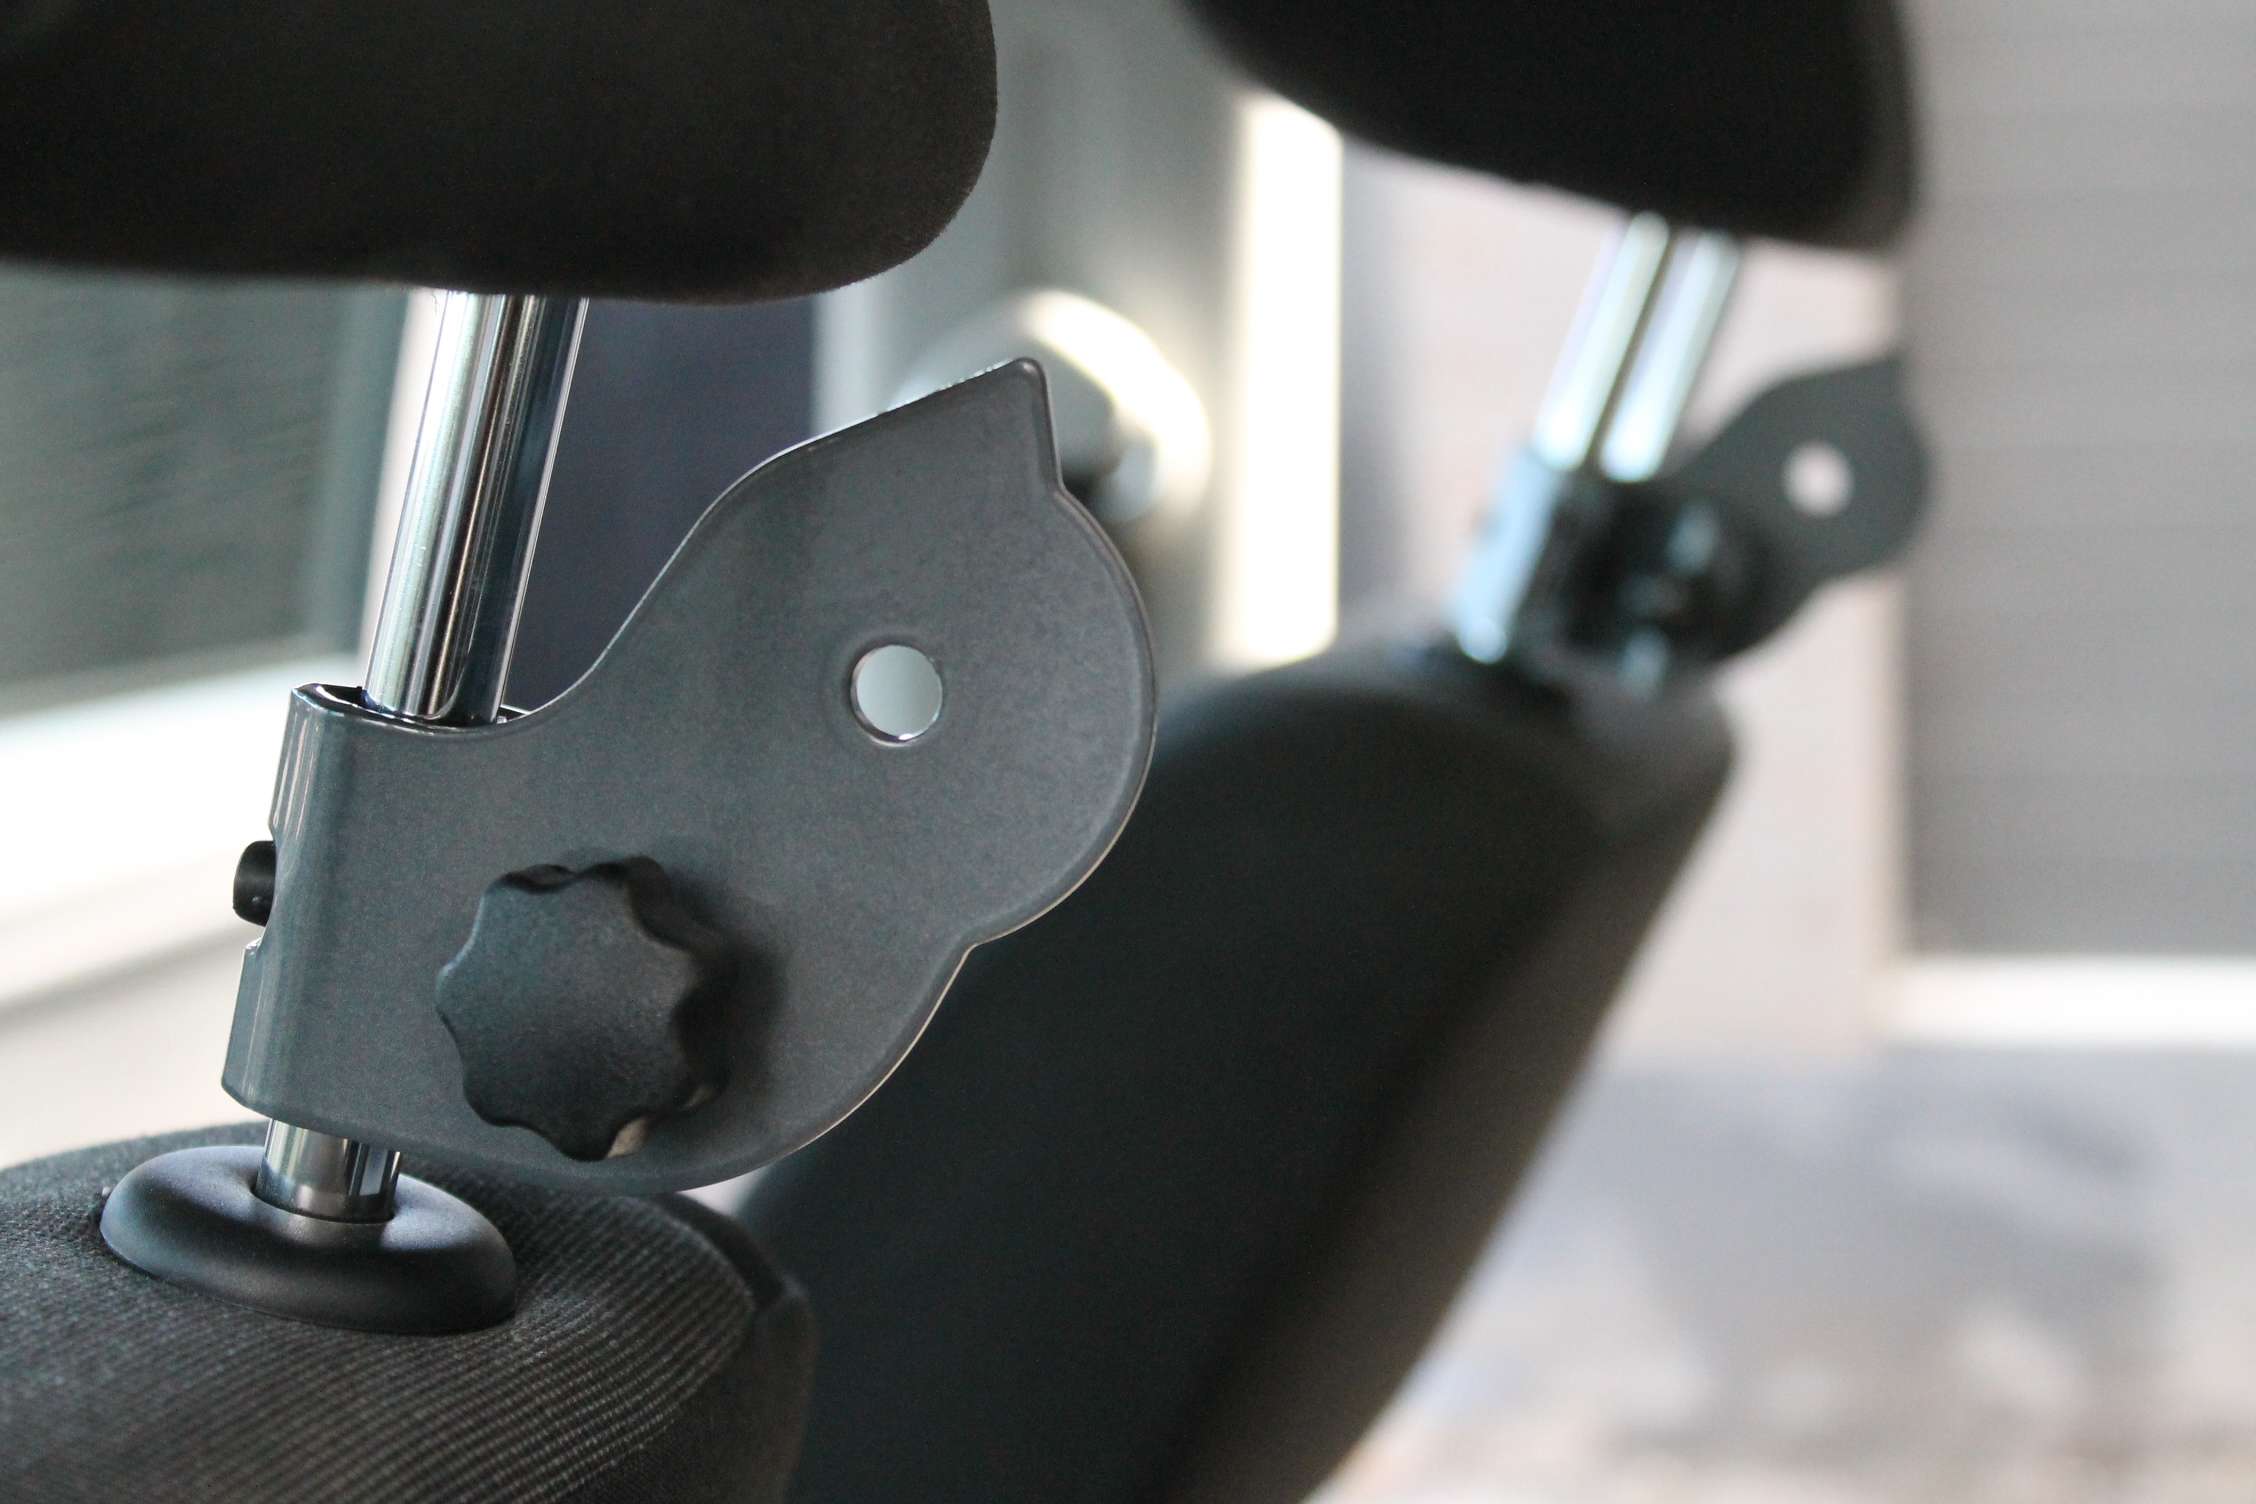 Clamps attach to the headrest pole